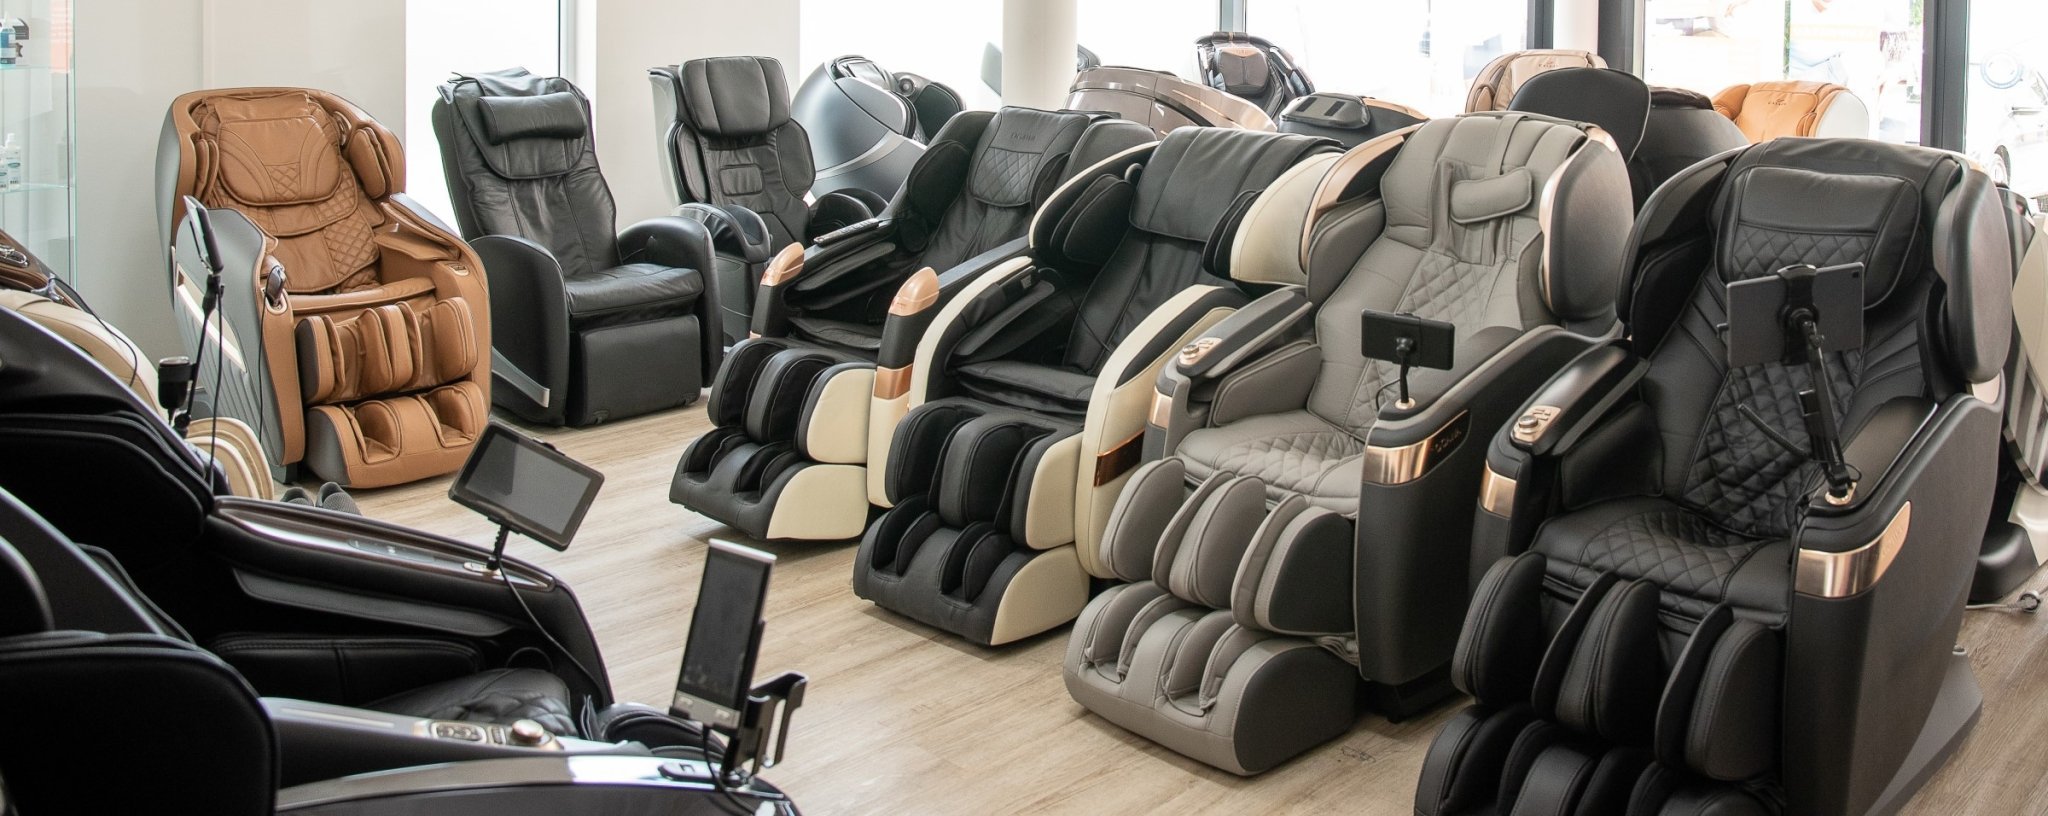 Our massage chairs OUTLET - Massage chairs world